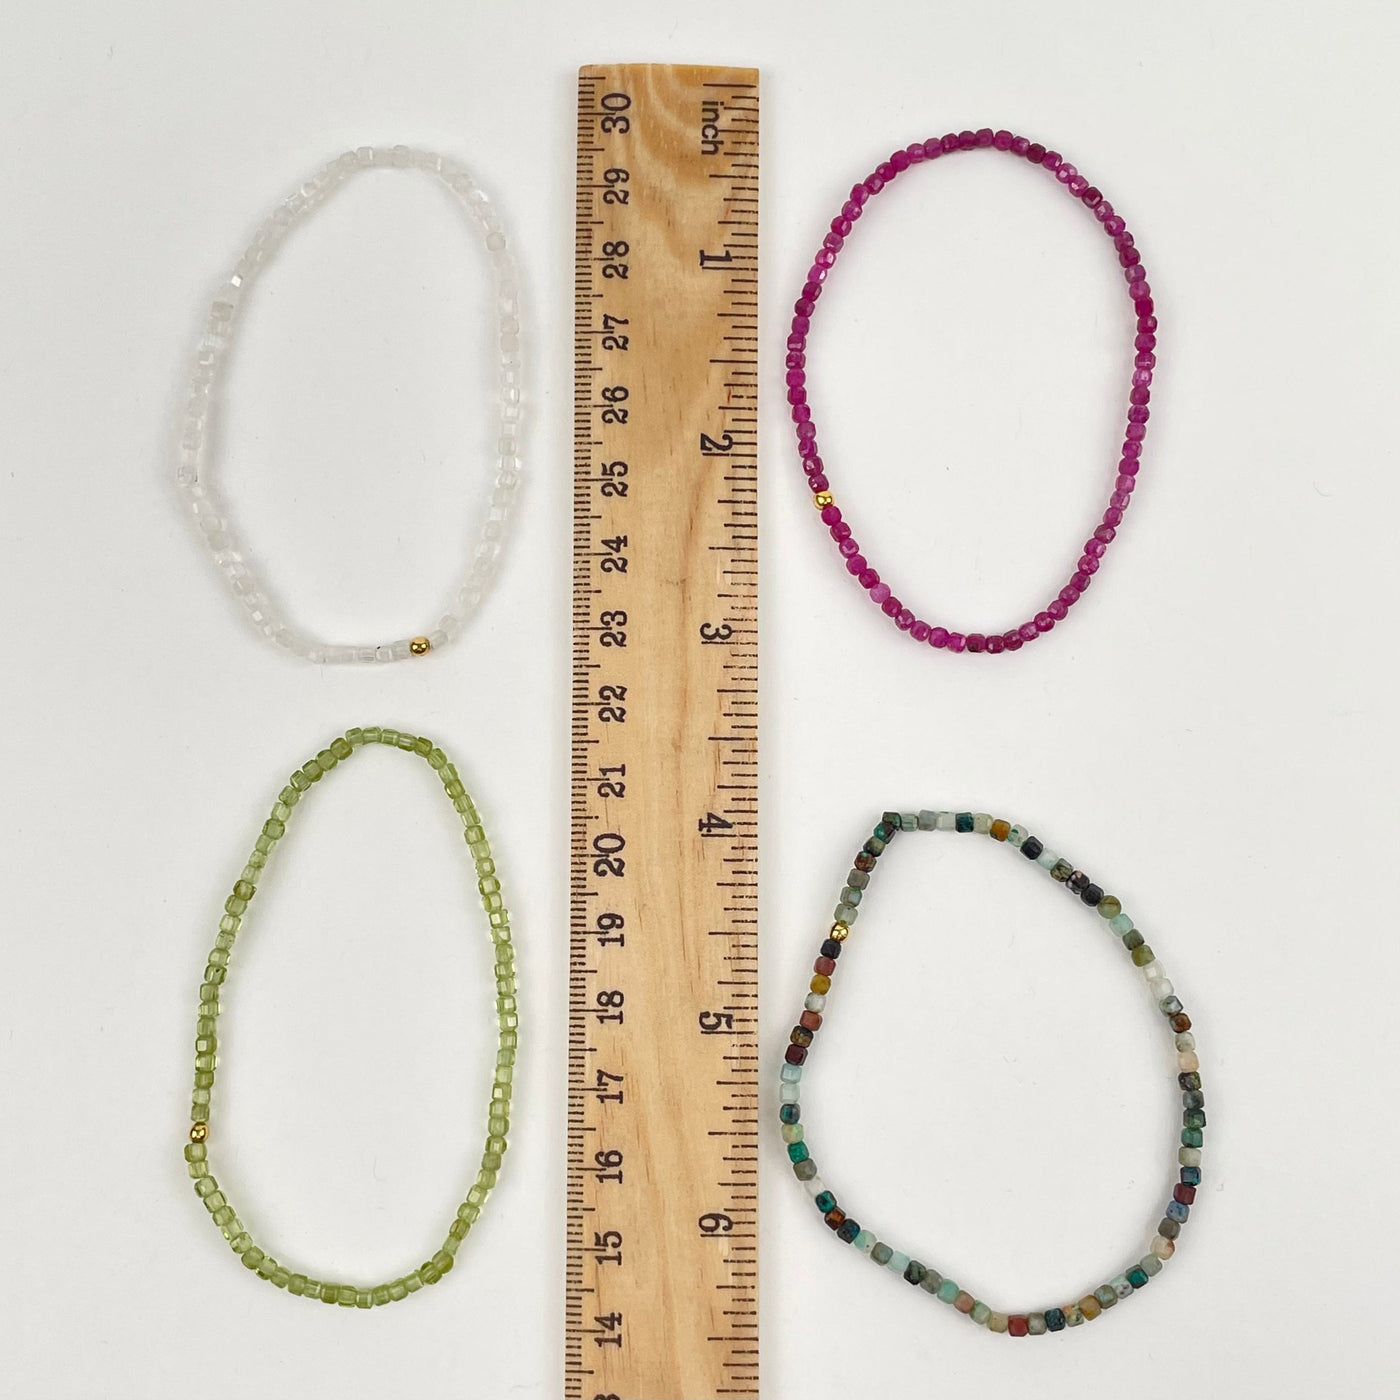 bracelets displayed next to a ruler for size reference 